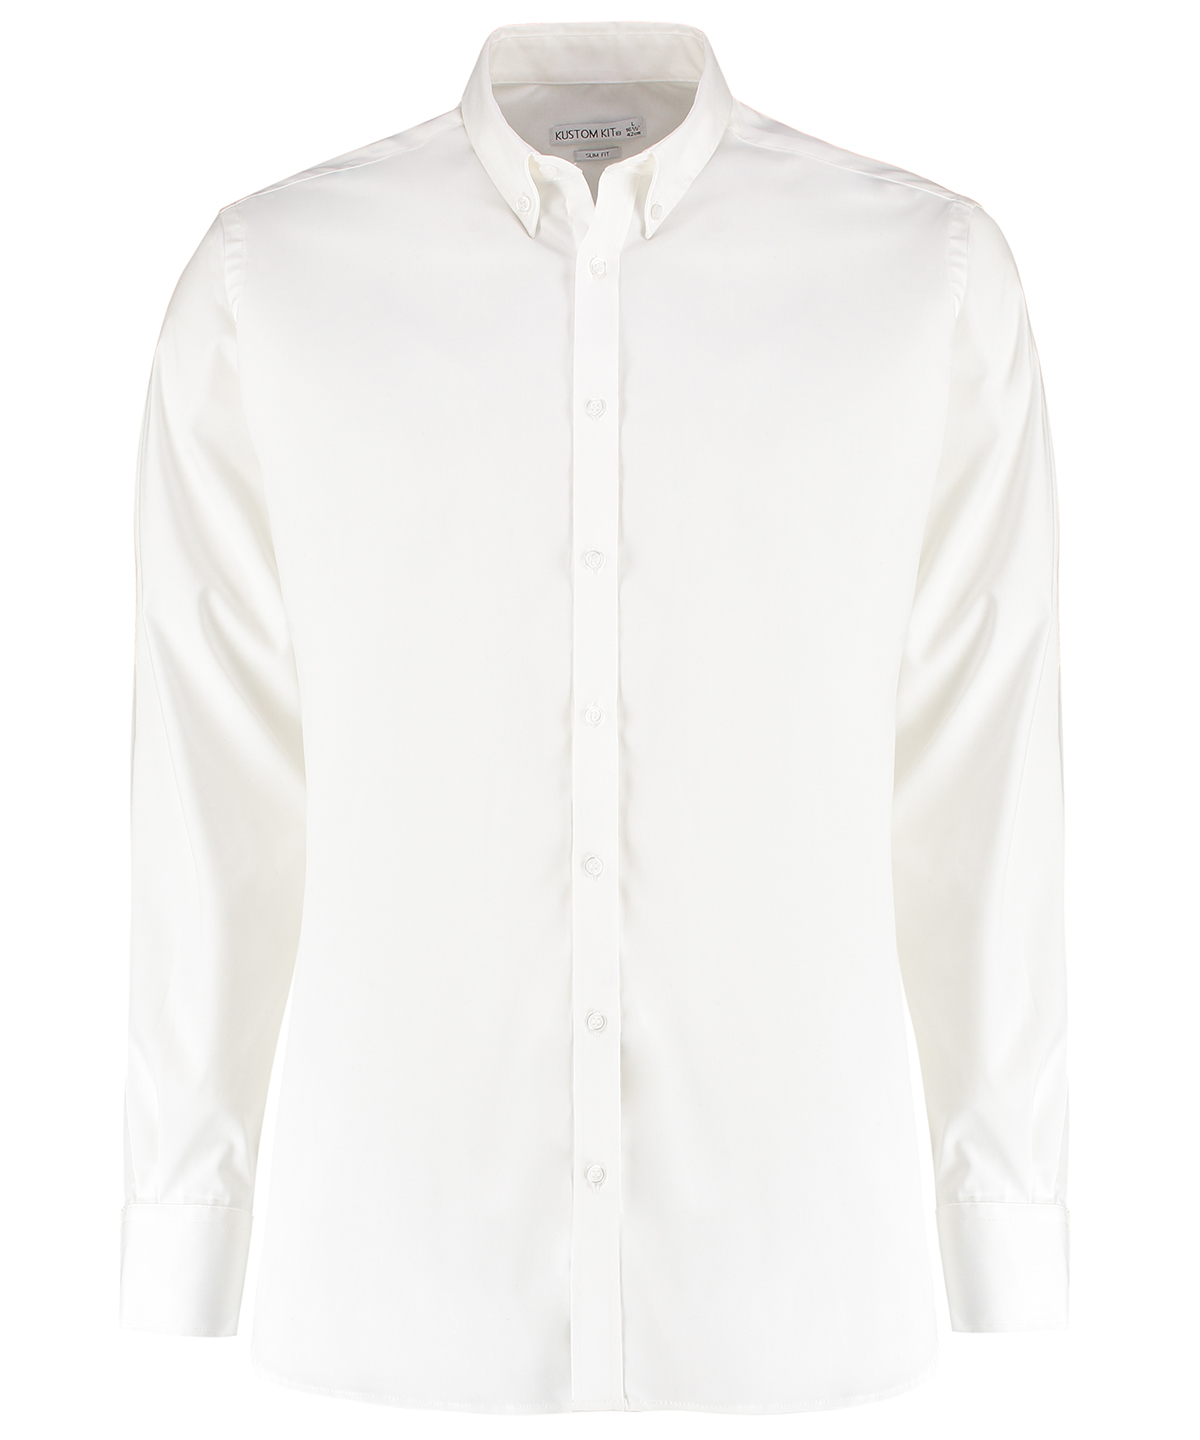 Stretch Oxford shirt long-sleeved (slim fit)